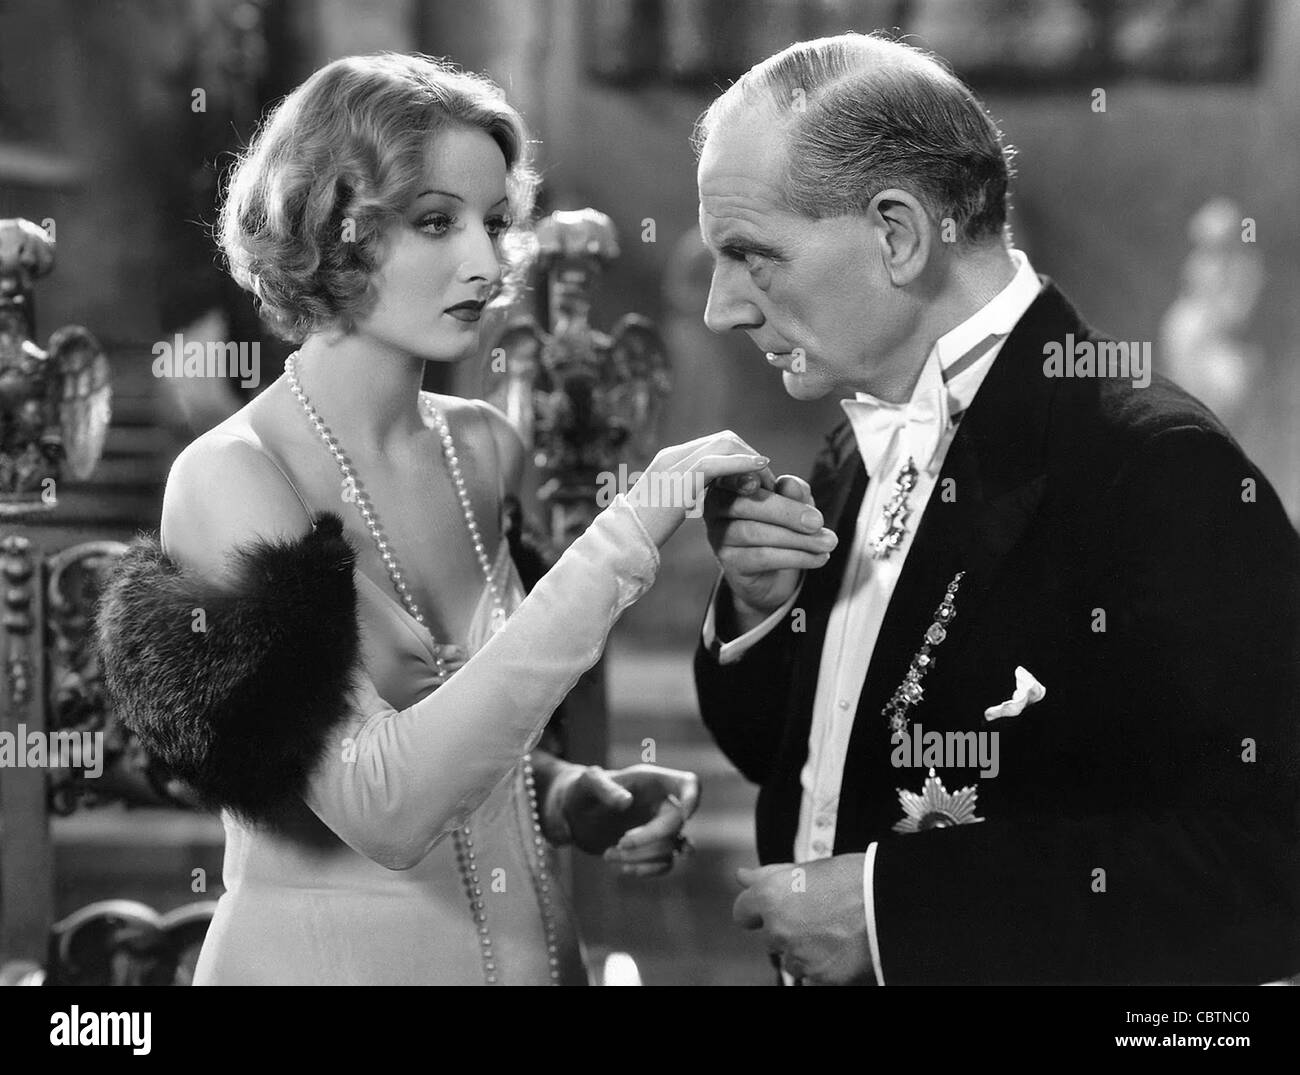 SECRETS OF THE FRENCH POLICE (1932) GWILI ANDRE A.EDWARD SUTHERLAND (DIR) 001 MOVIESTORE COLLECTION LTD Stock Photo